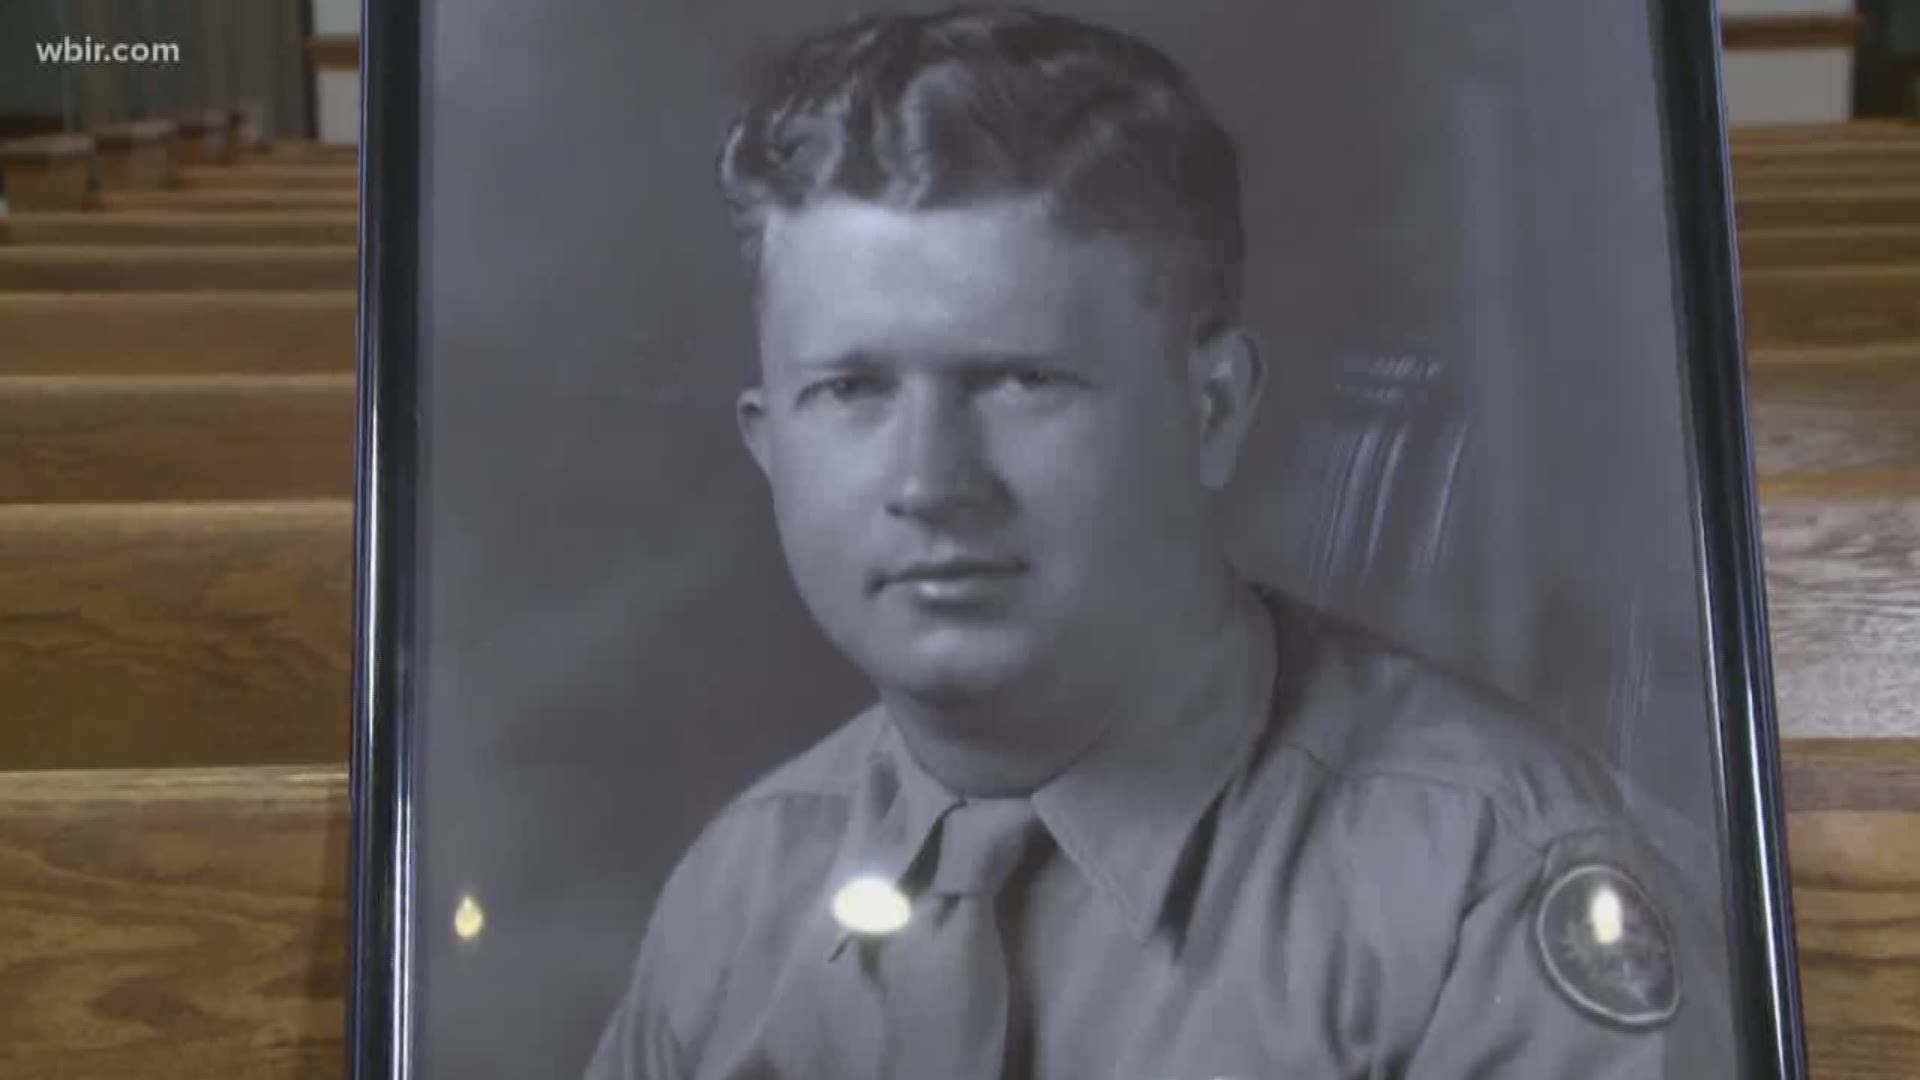 Across East Tennessee we know the names of veterans like Sergeant York and Lieutenant Bonnyman. We have cemented their courageous actions in memorials and our memories. When recognizing homegrown war heroes, only relatively recently did the world learn that list should also include Master Sergeant Roddie Edmonds.